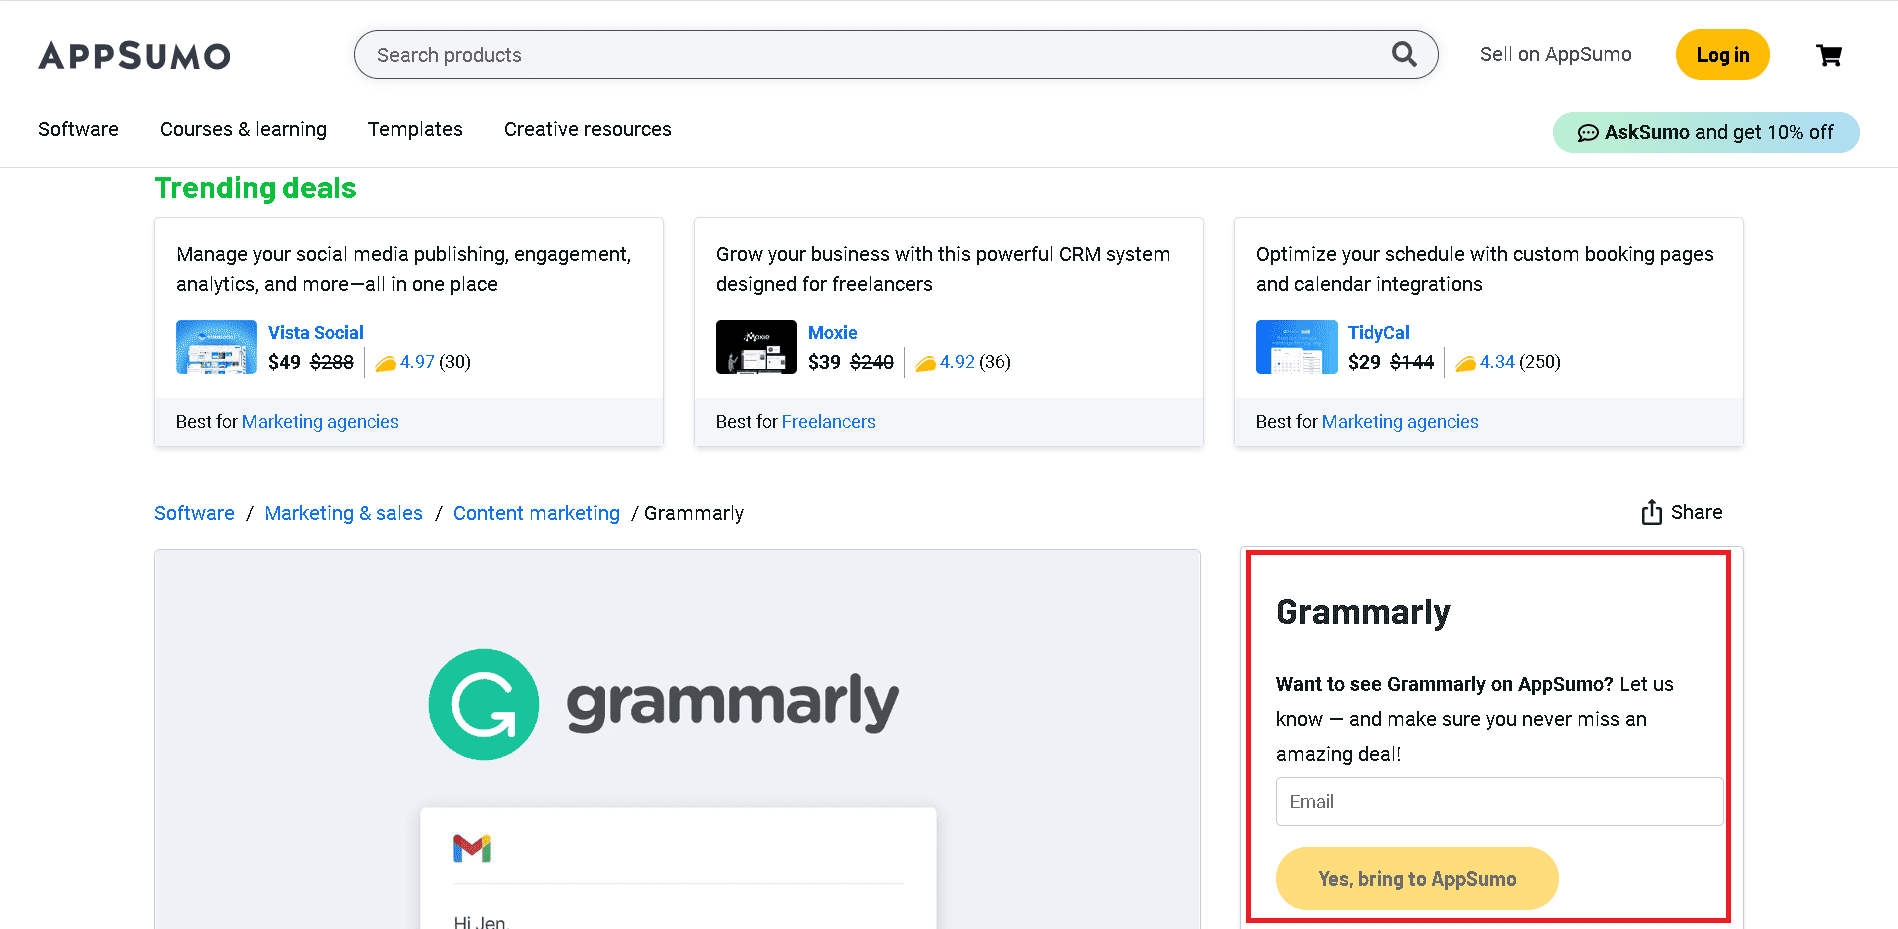 Grammarly AppSumo sale doesn't exist